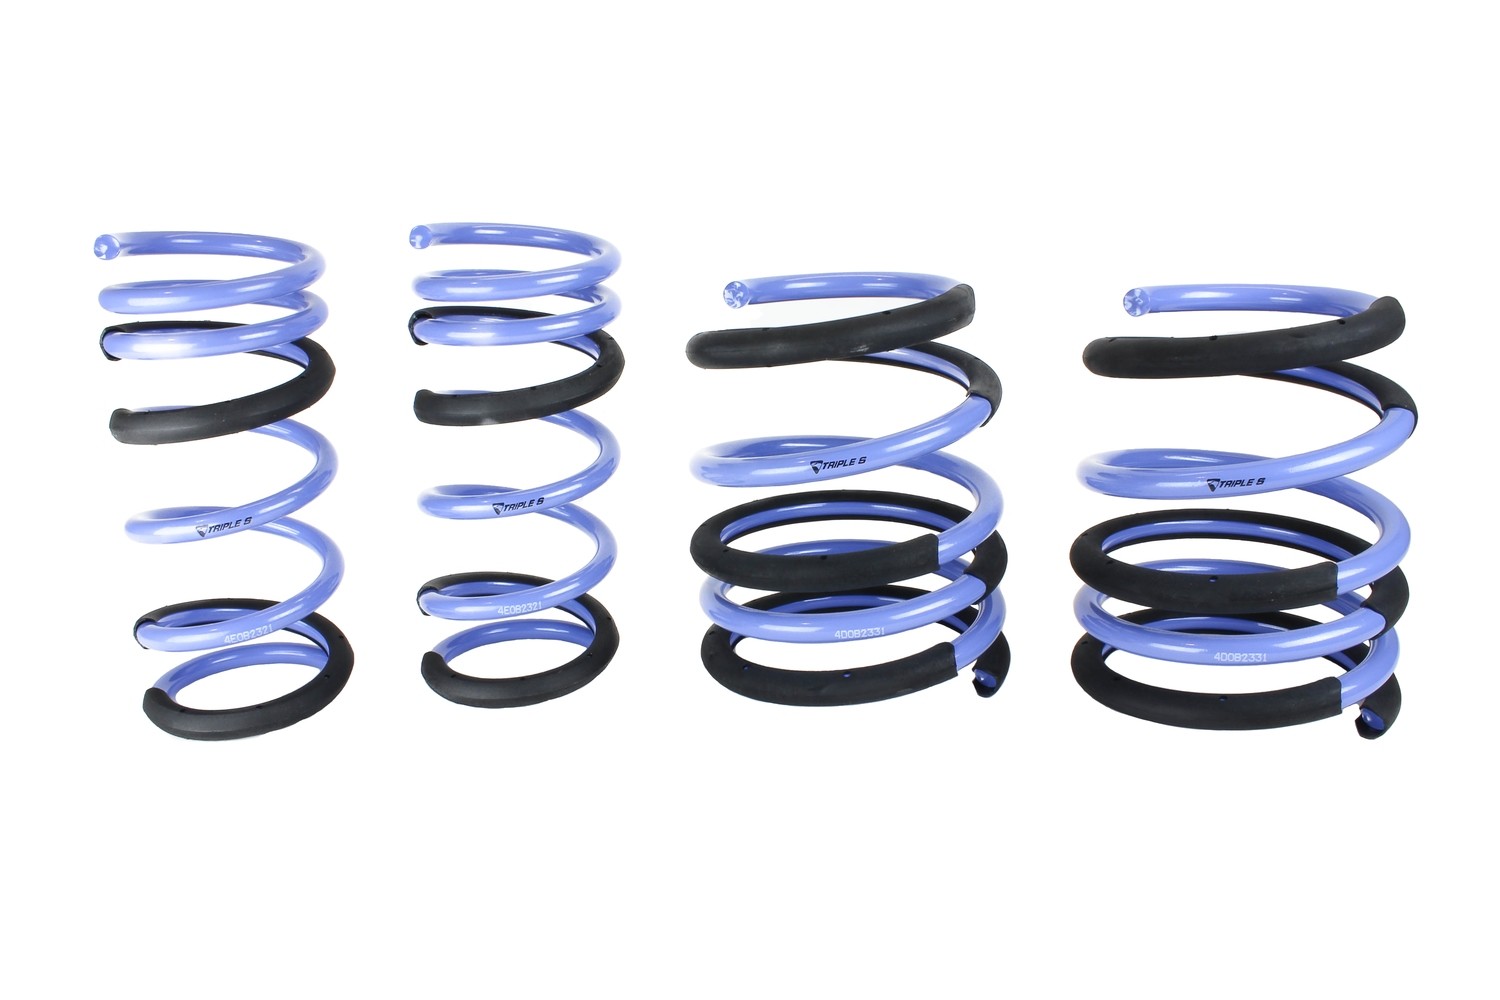 Subaru STI GR Chassis Triple S Lowering Spring Clearance